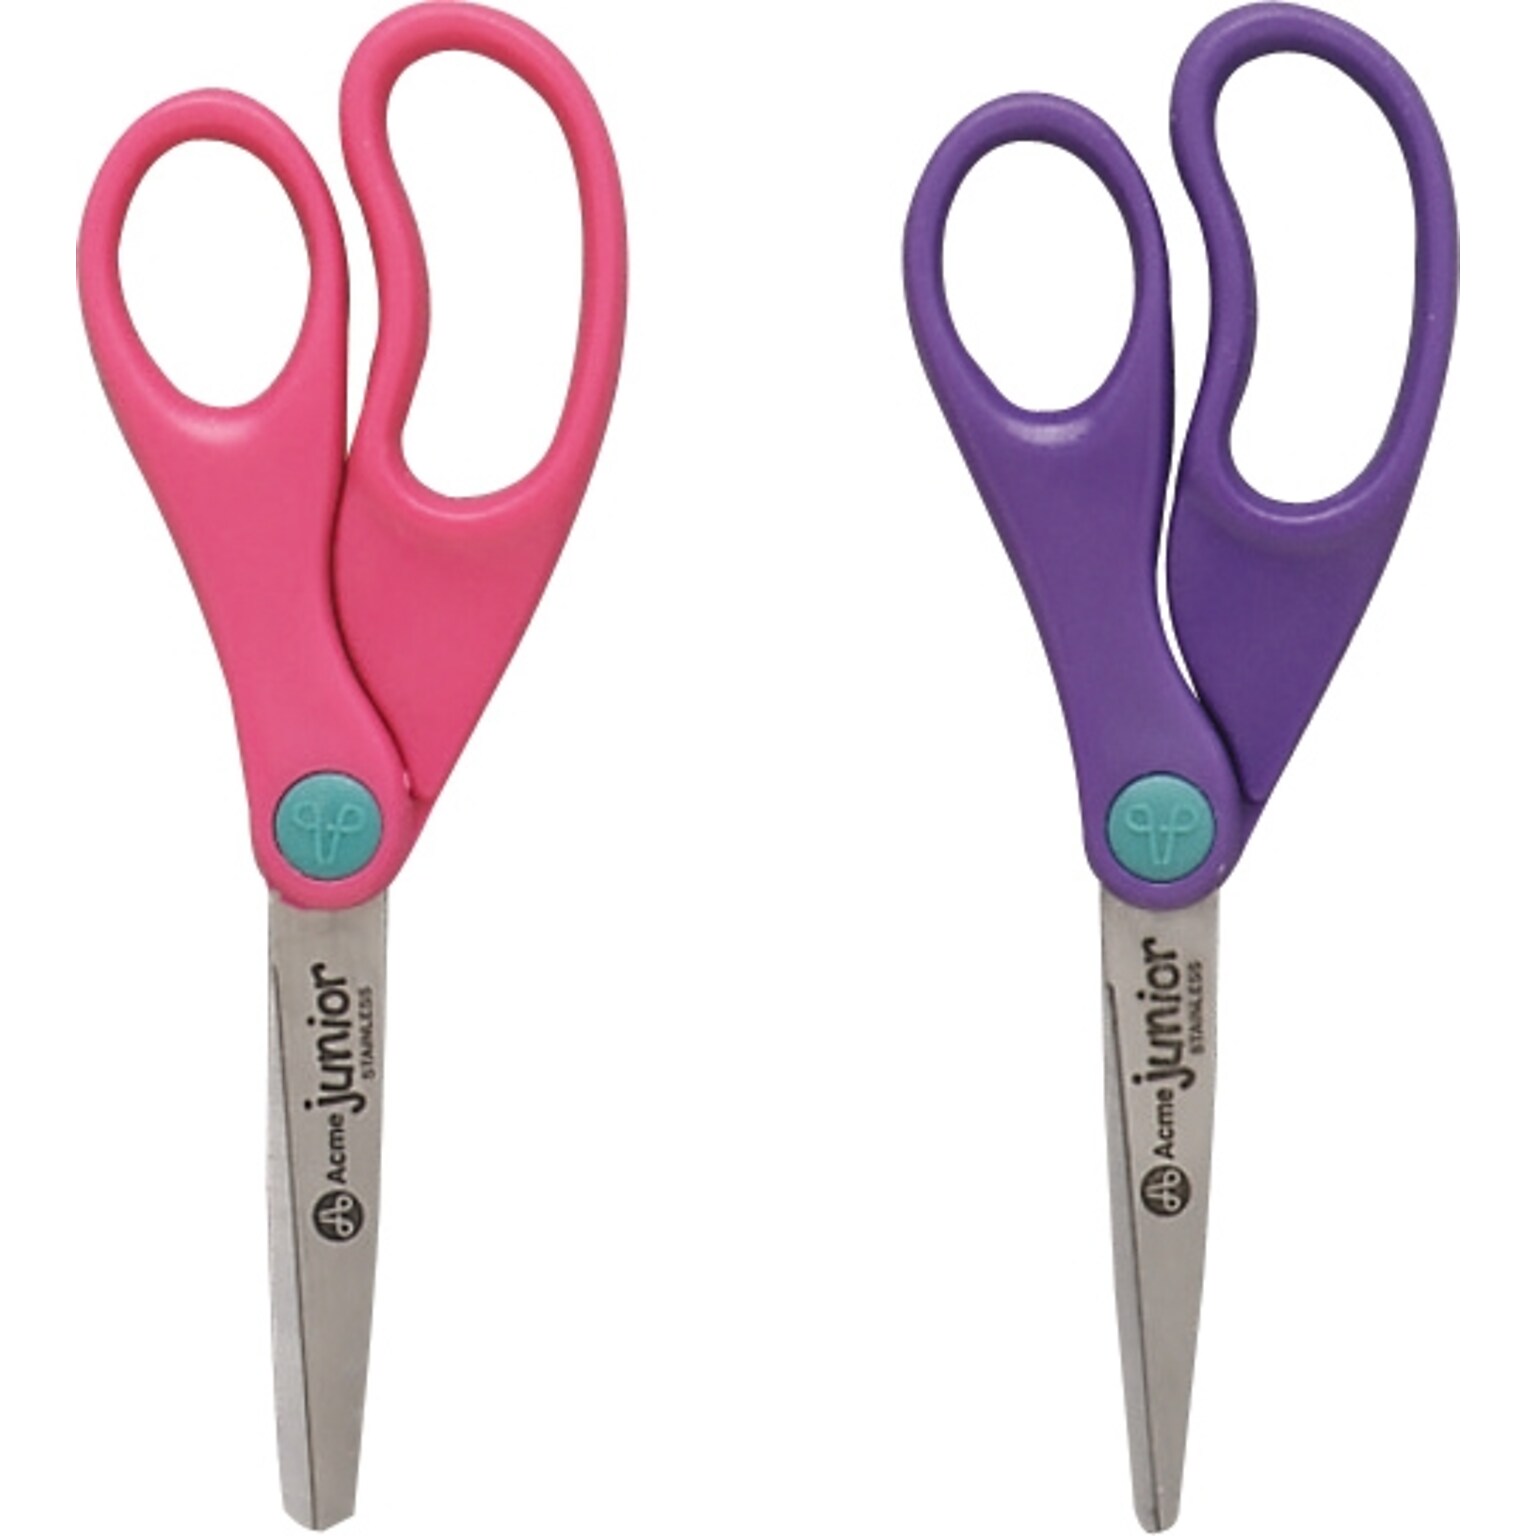 Westcott Value 5 Stainless Steel Kids Scissors, Pointed Tip, Assorted Colors, 12/Pack (13141)